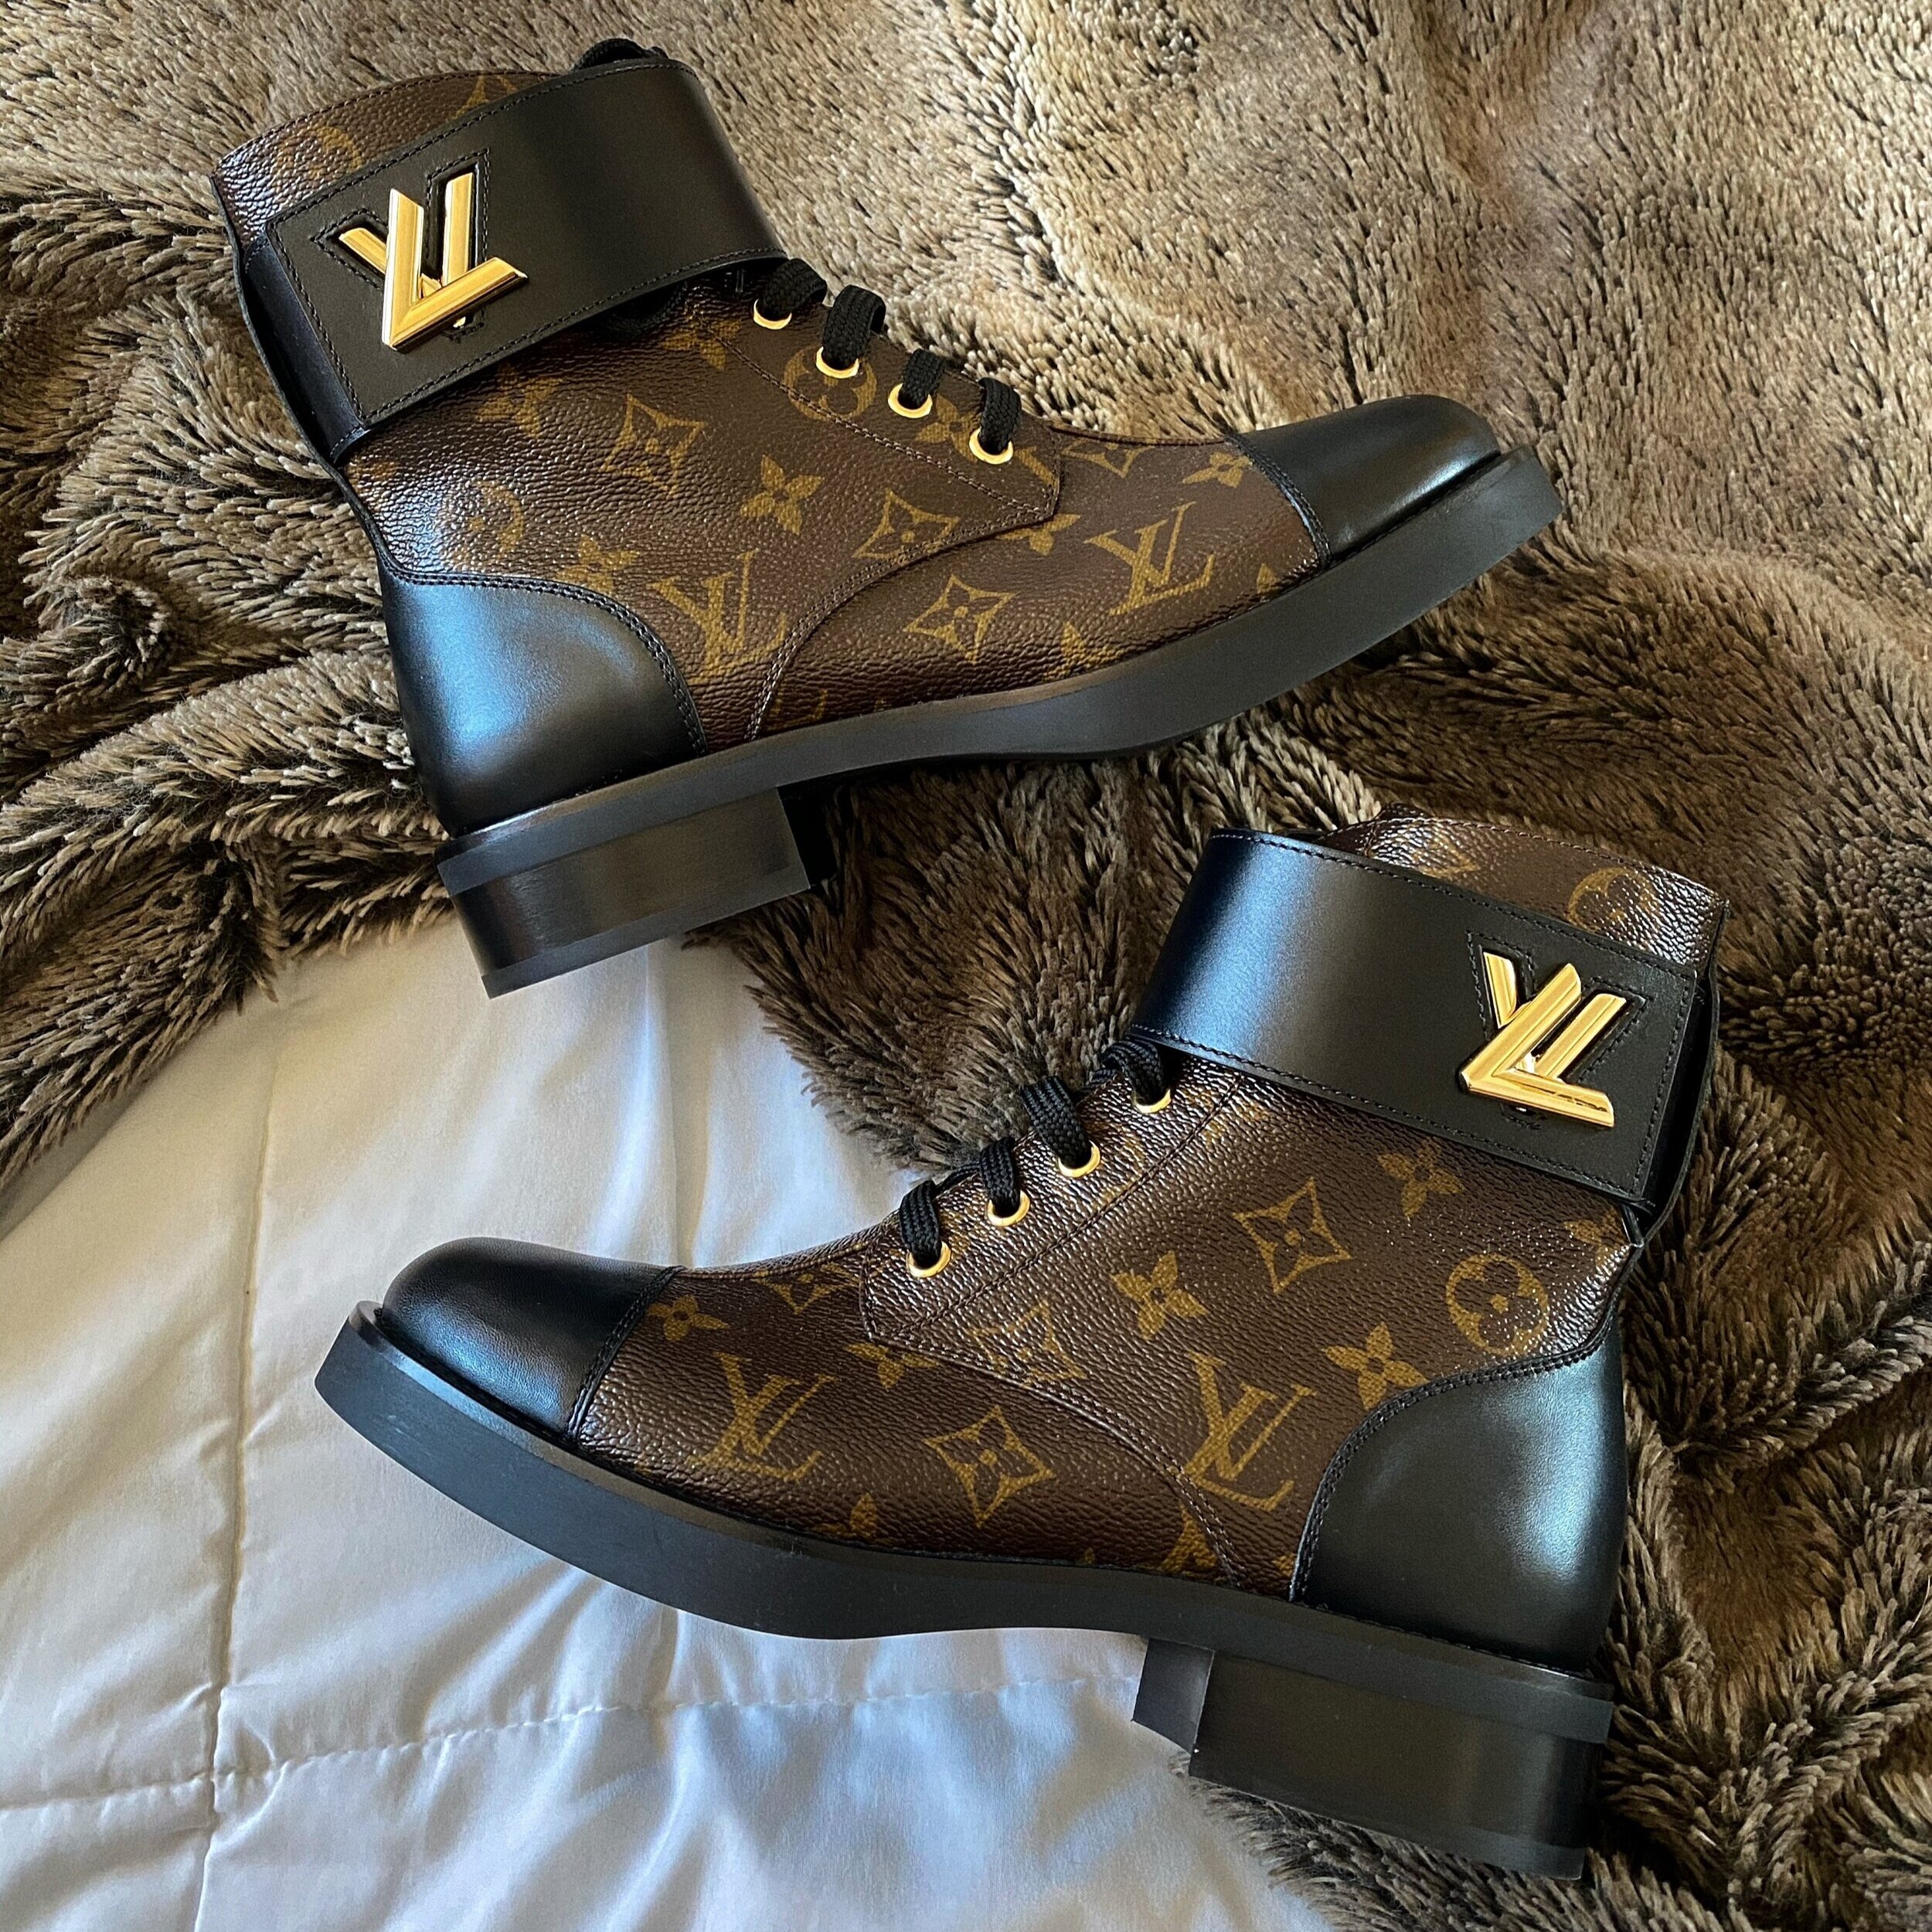 Louis Vuitton Wonderland Flat Ranger available 😍 What would you